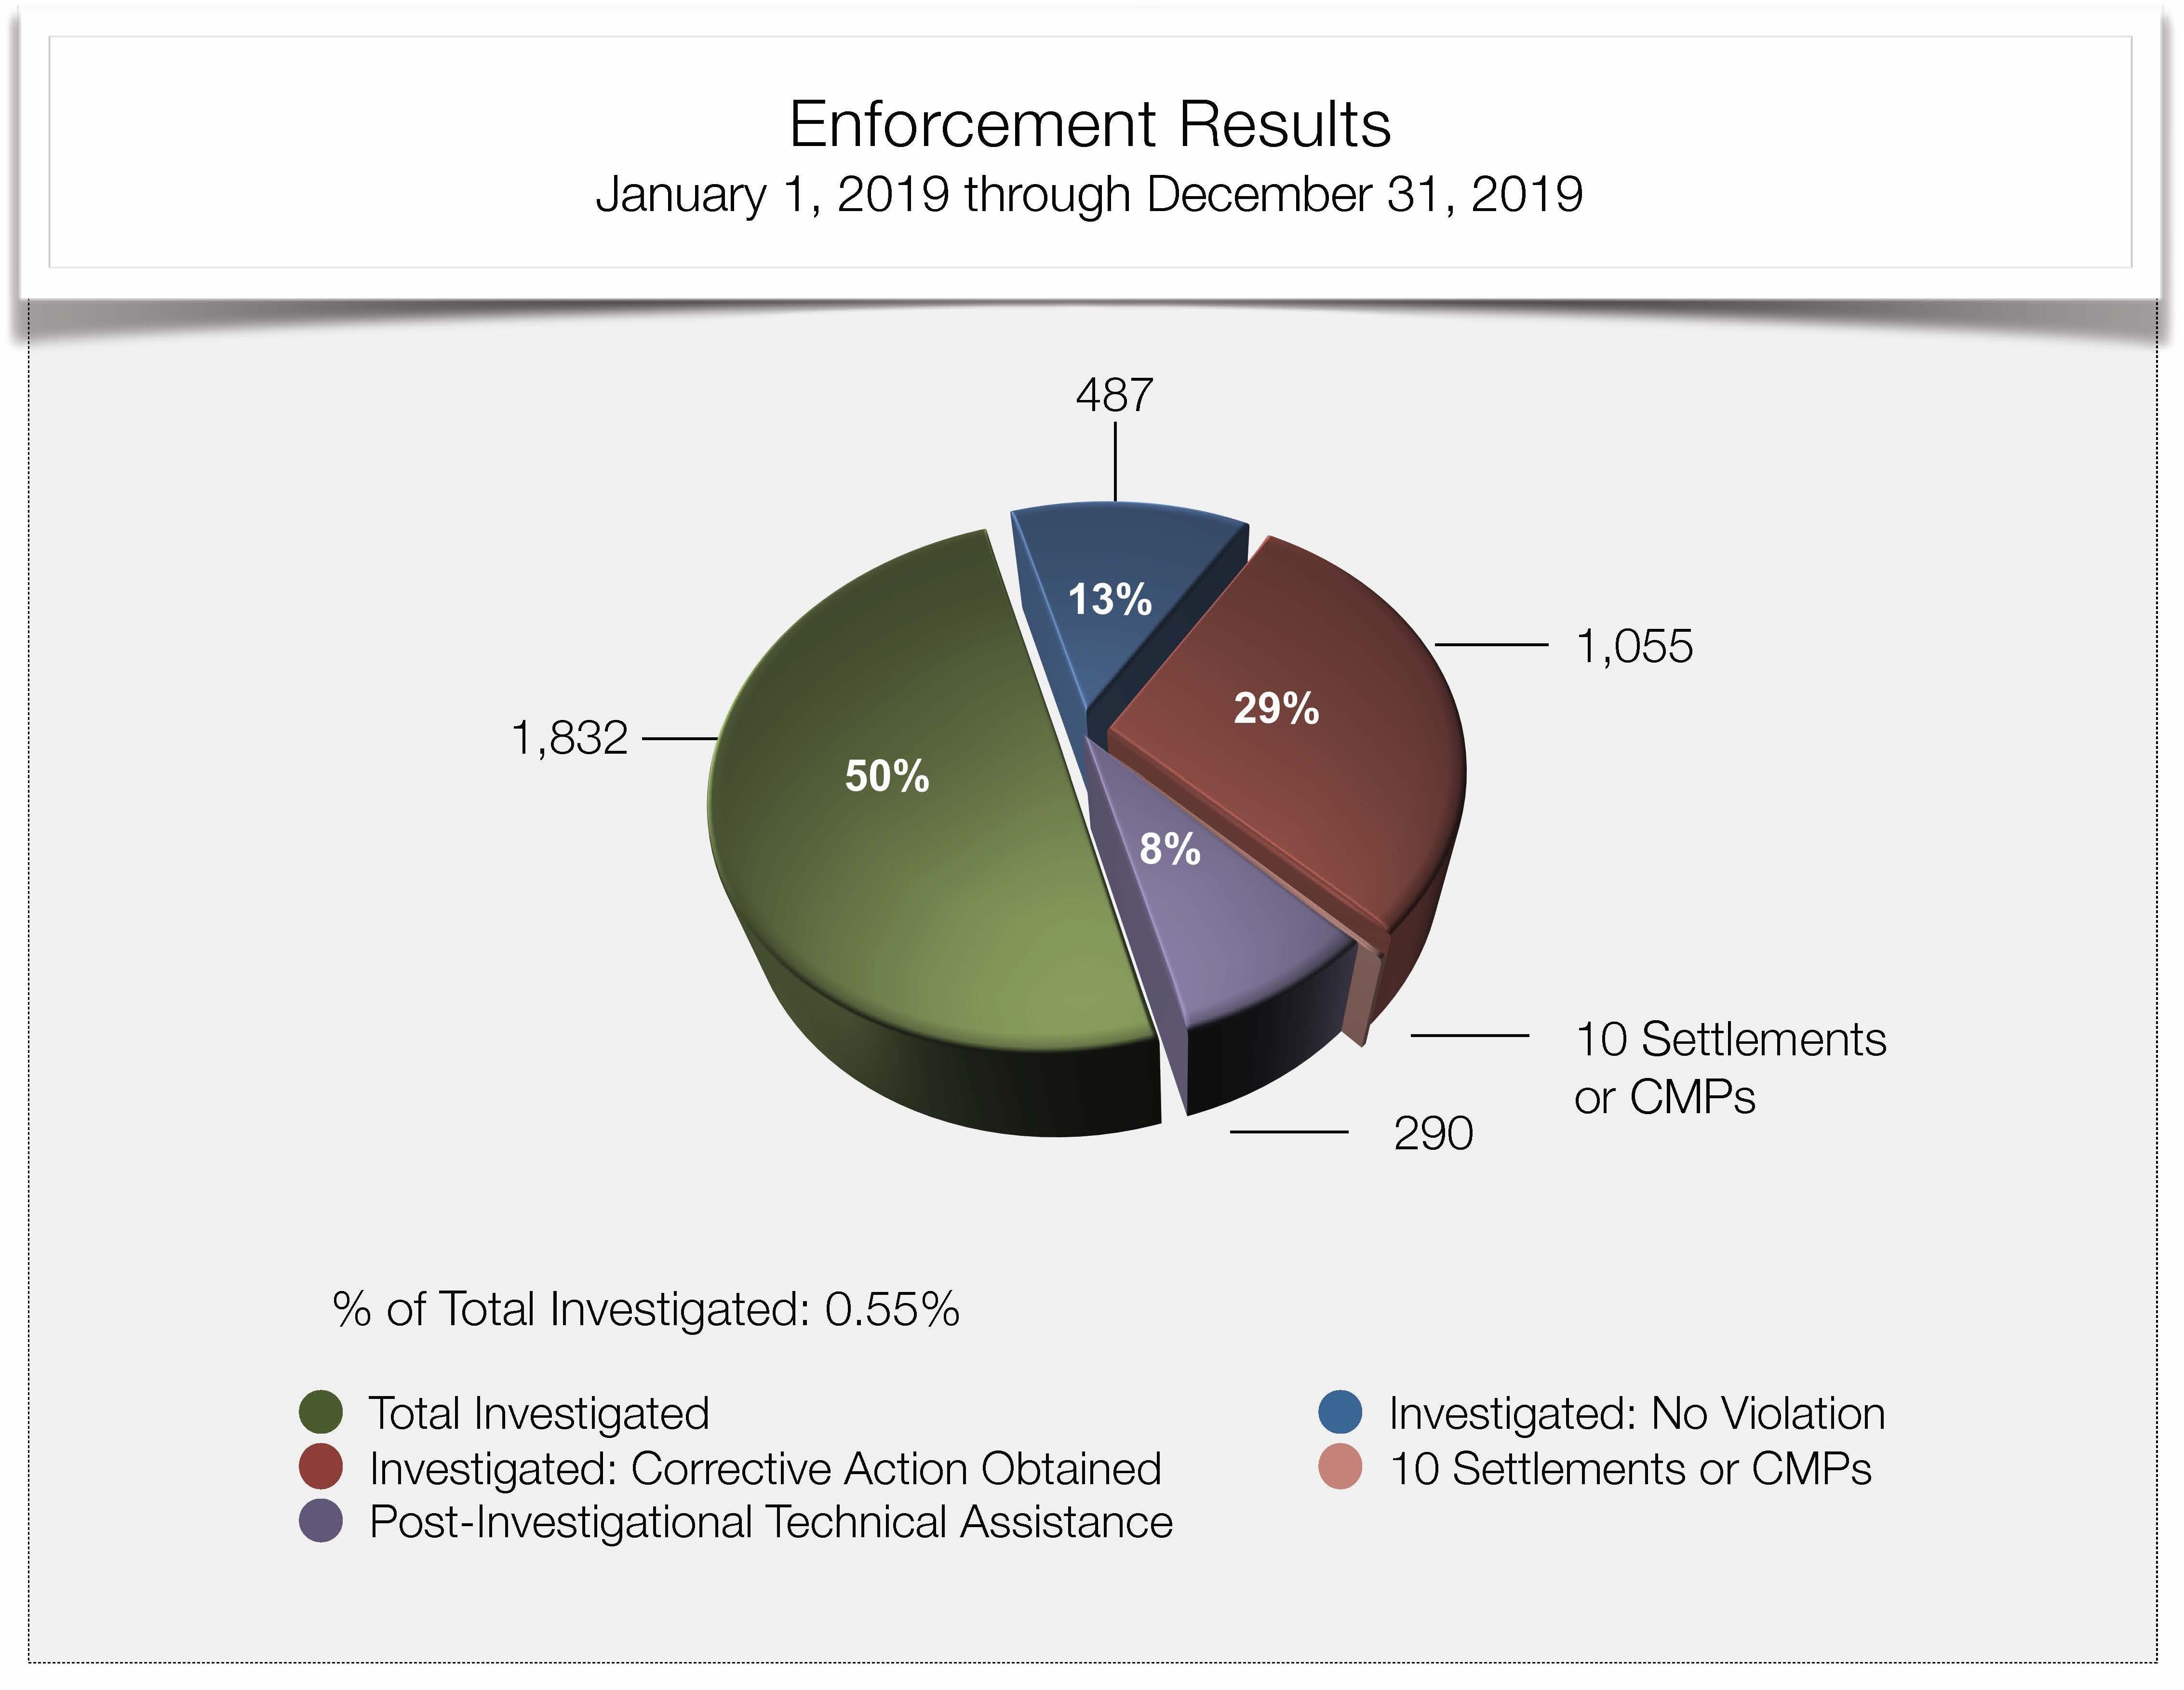 Enforcement Results - January 1, 2019 through December 31, 2019